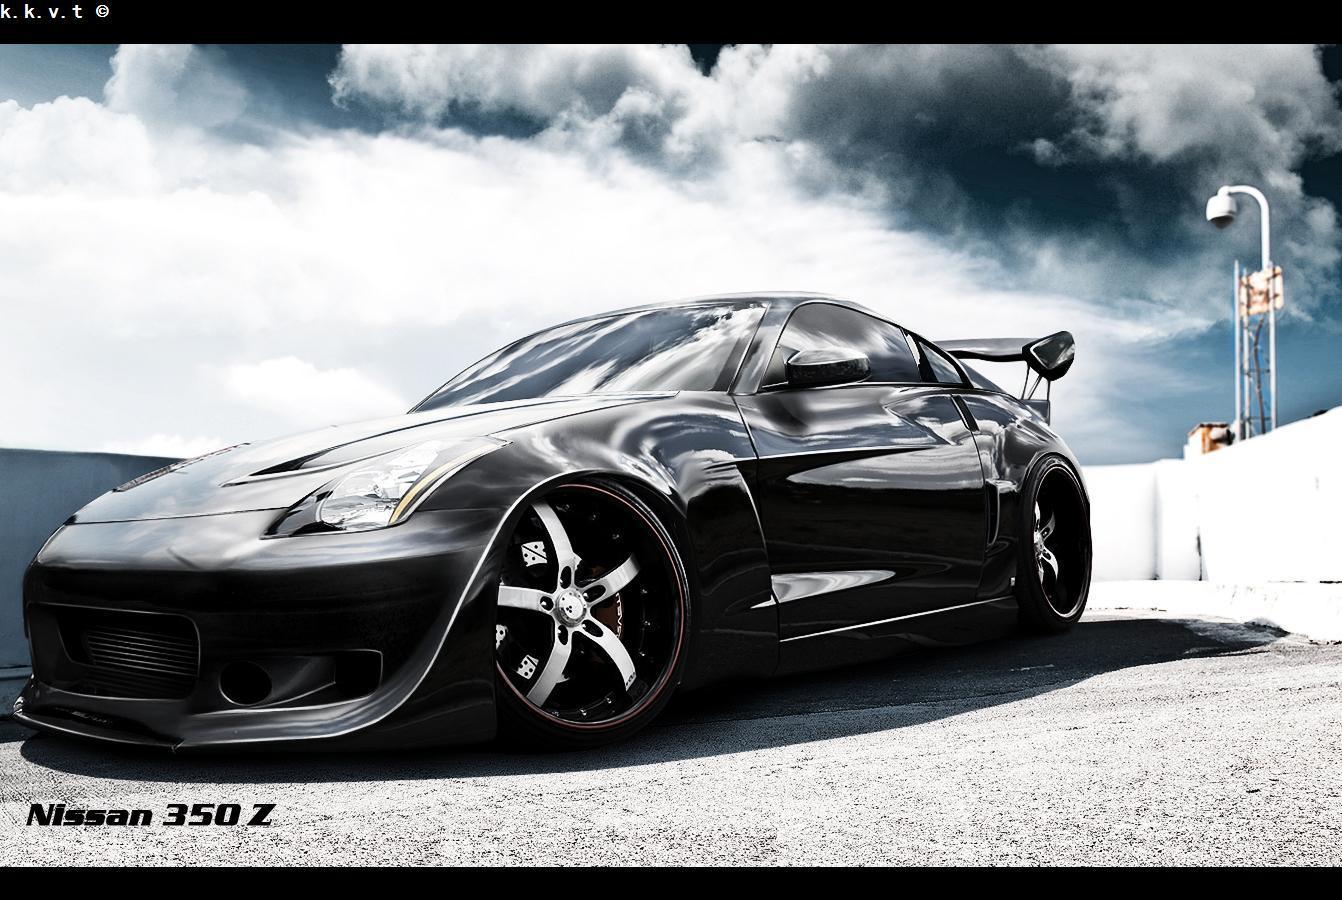 Nissan 350Z Wallpapers - Wallpaper Cave